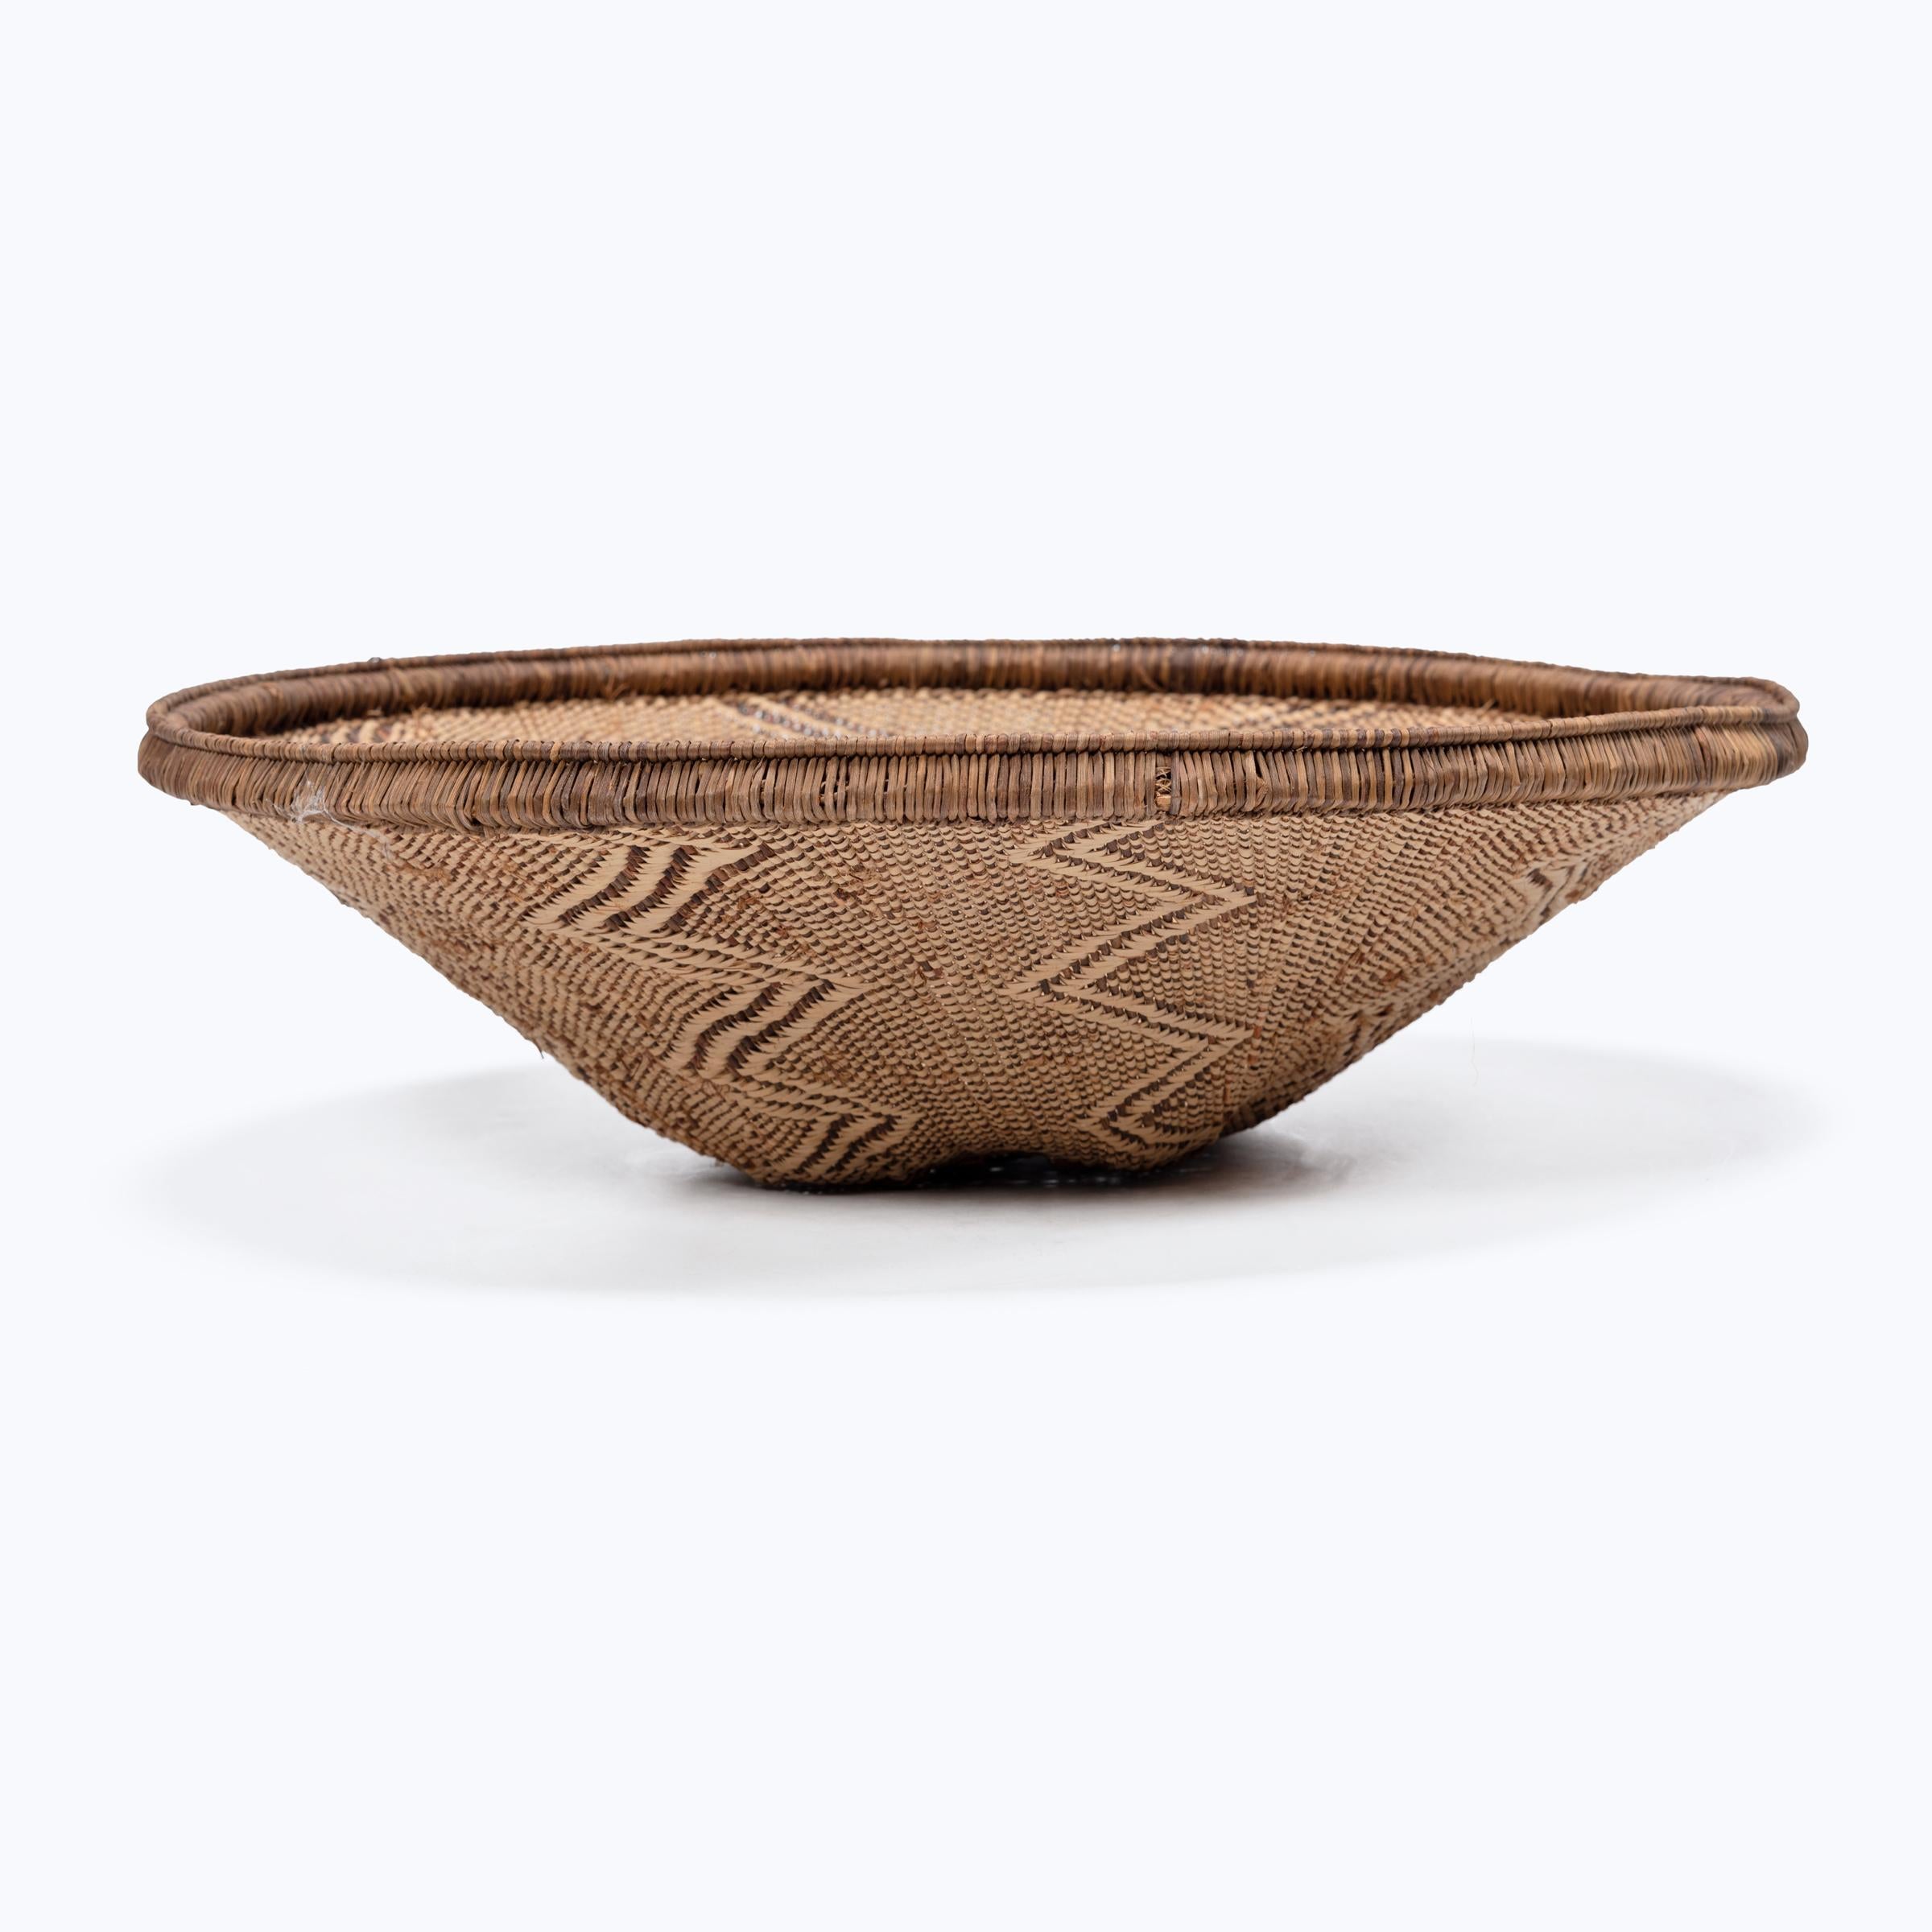 Tightly woven of reeds and willow, this round tray basket was crafted by artisans of the baTonga people of Zambia and Zimbabwe. Contrasting light and dark materials create zig-zag patterns that run down the basket's tapered form, ending in a flat